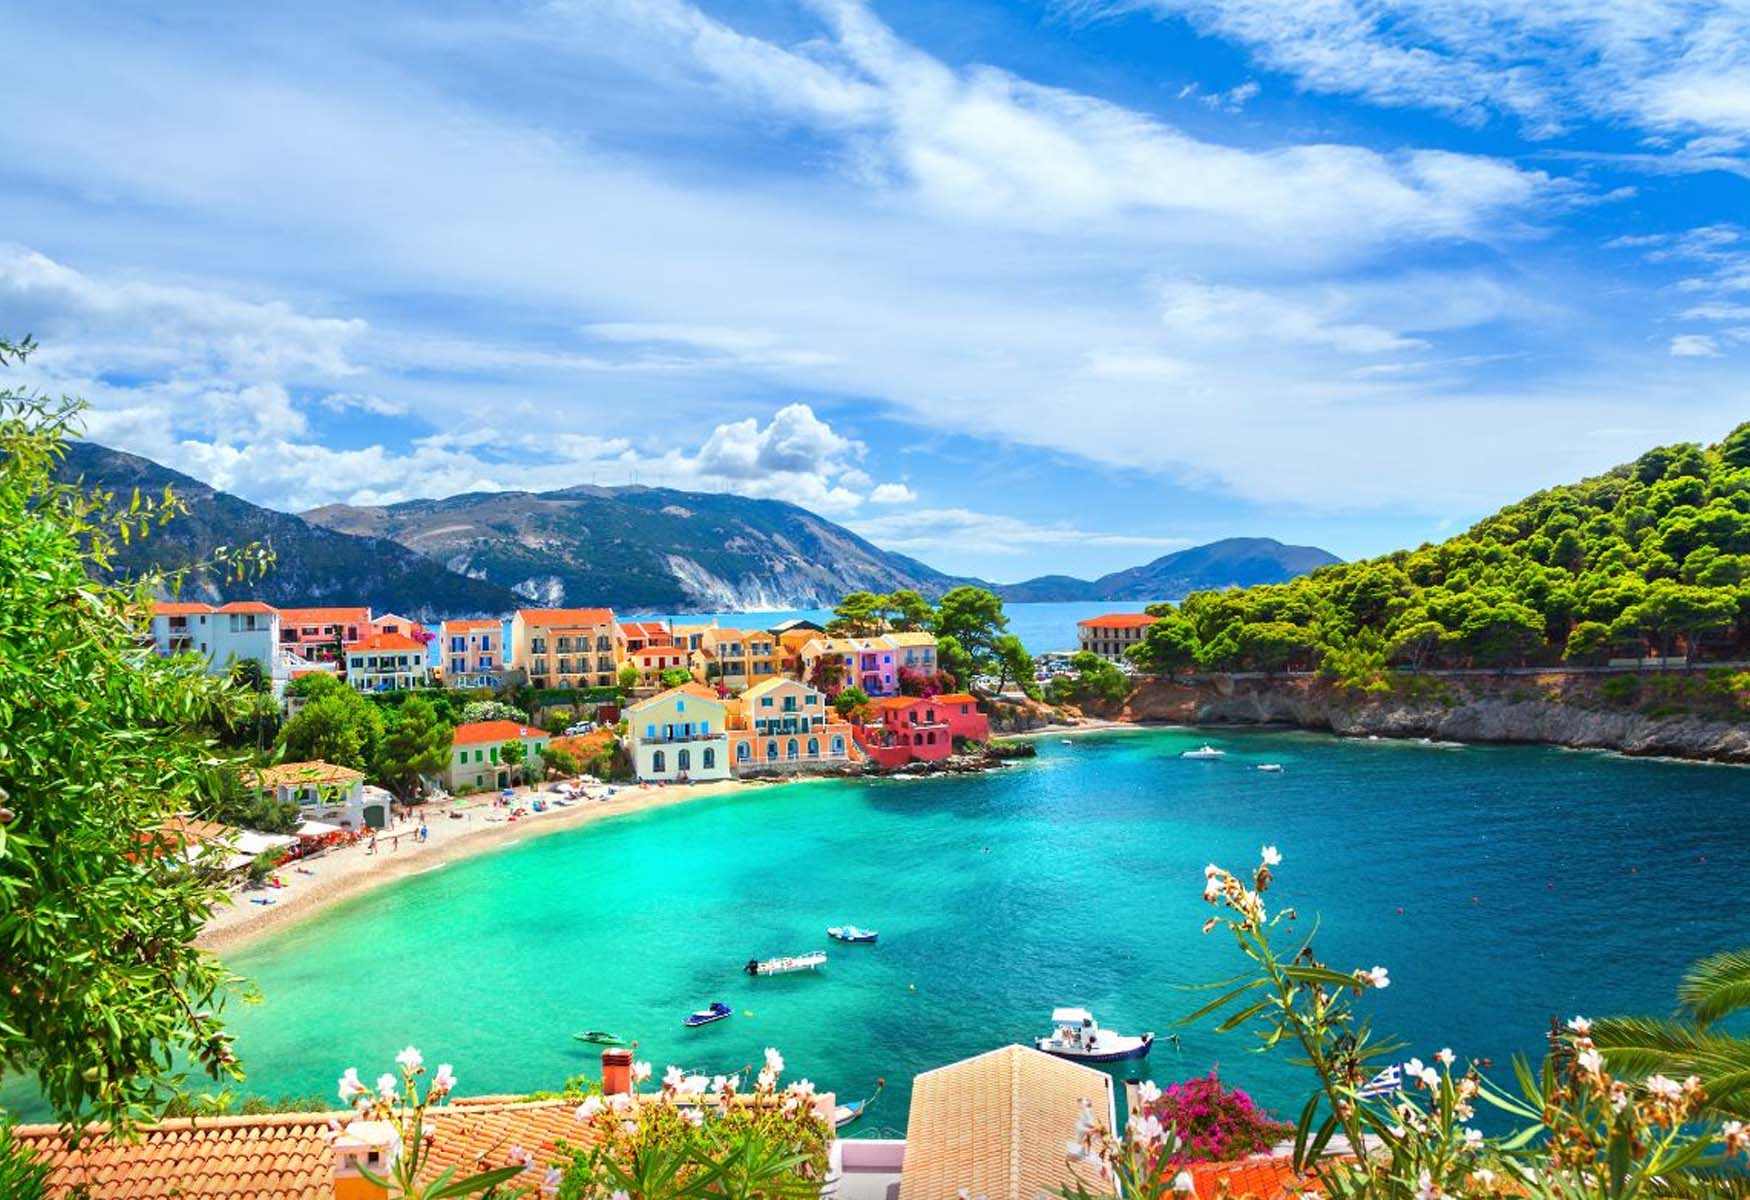 Where To Stay In Kefalonia: The BEST Areas